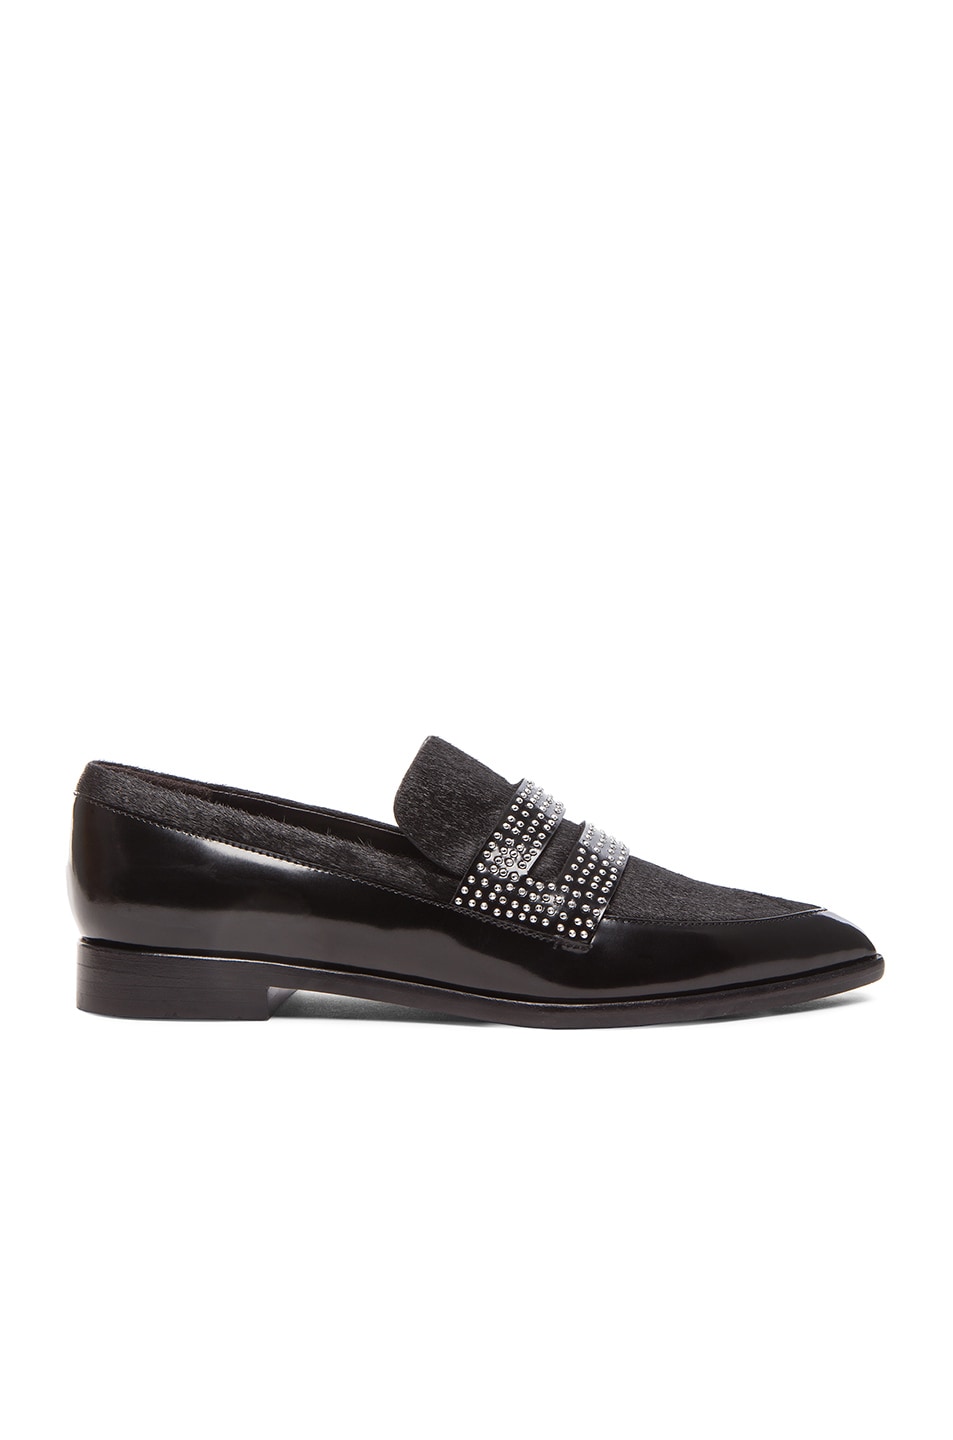 Image 1 of Sigerson Morrison Inkaley Patent Leather & Calf Hair Flats in Black